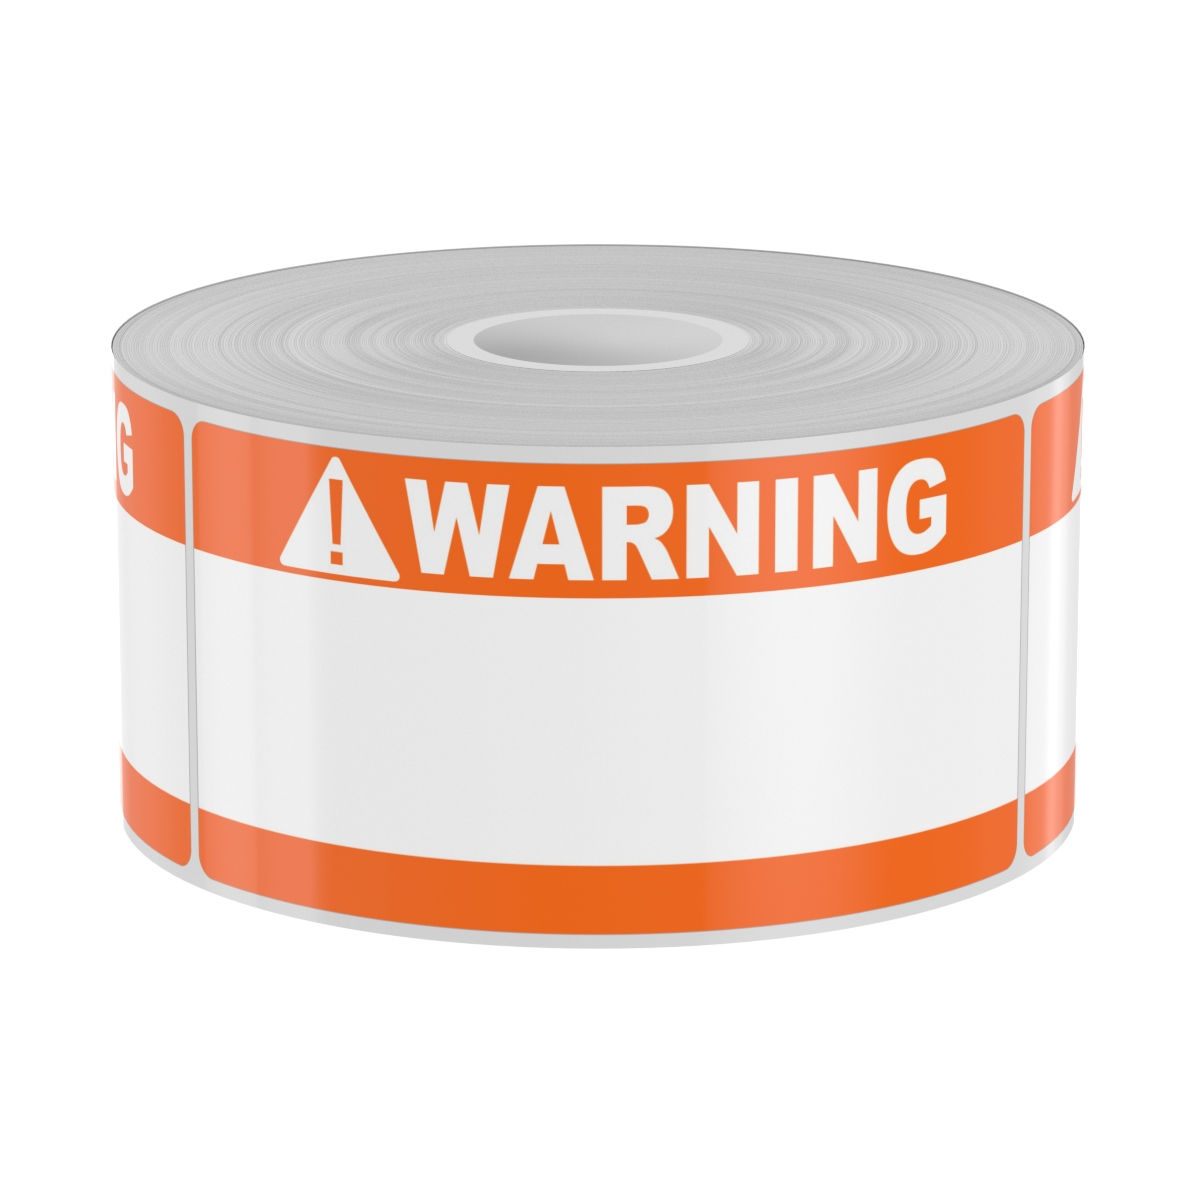 Detail view for 250 2" x 4" High-Performance Die-Cut Orange Double Band with White Warning